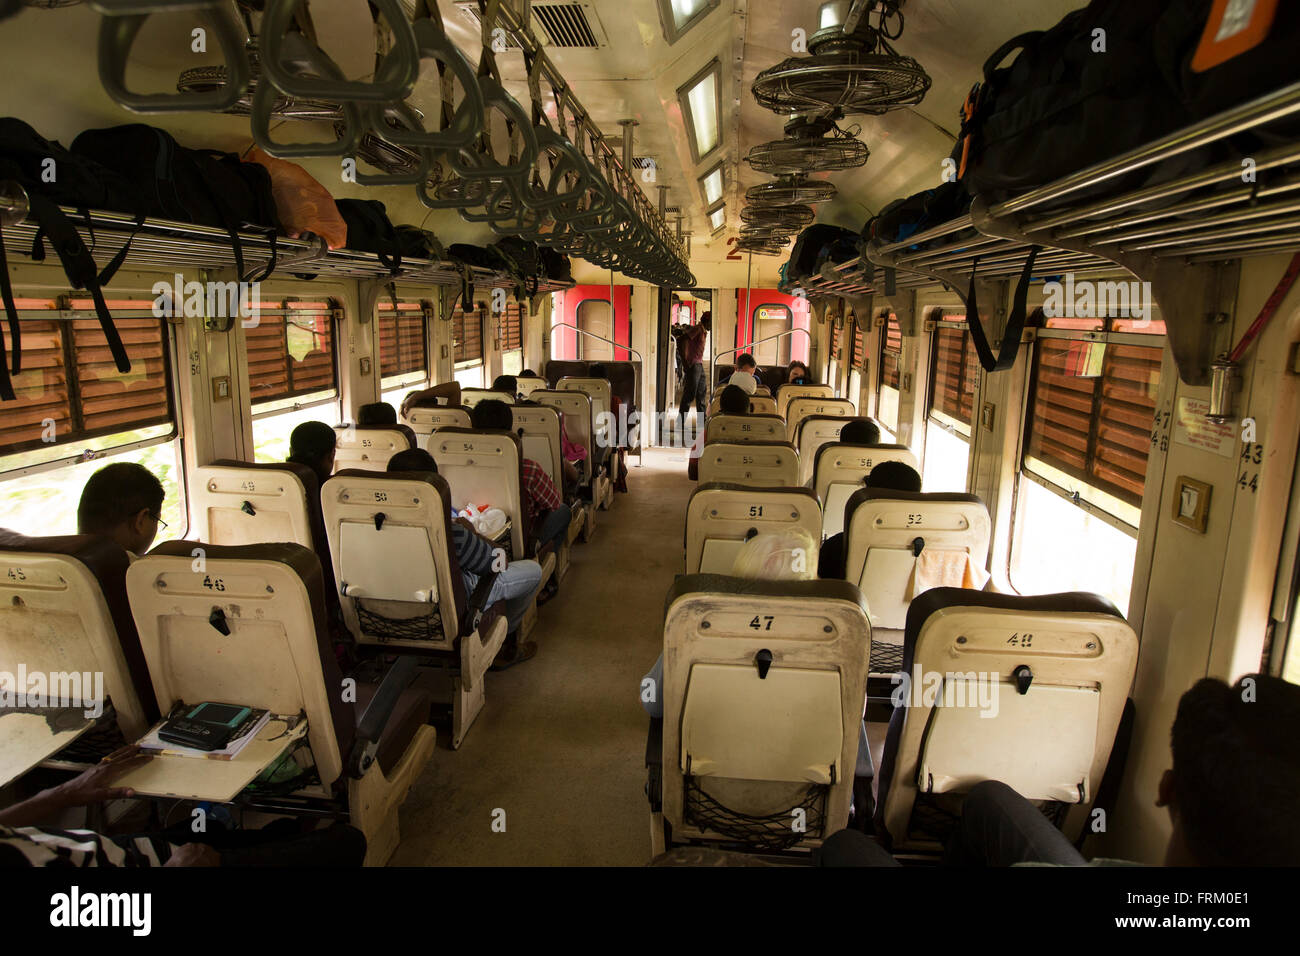 Sri Lanka, Colombo, train travel, passengers in second class carriage on inter city route Stock Photo